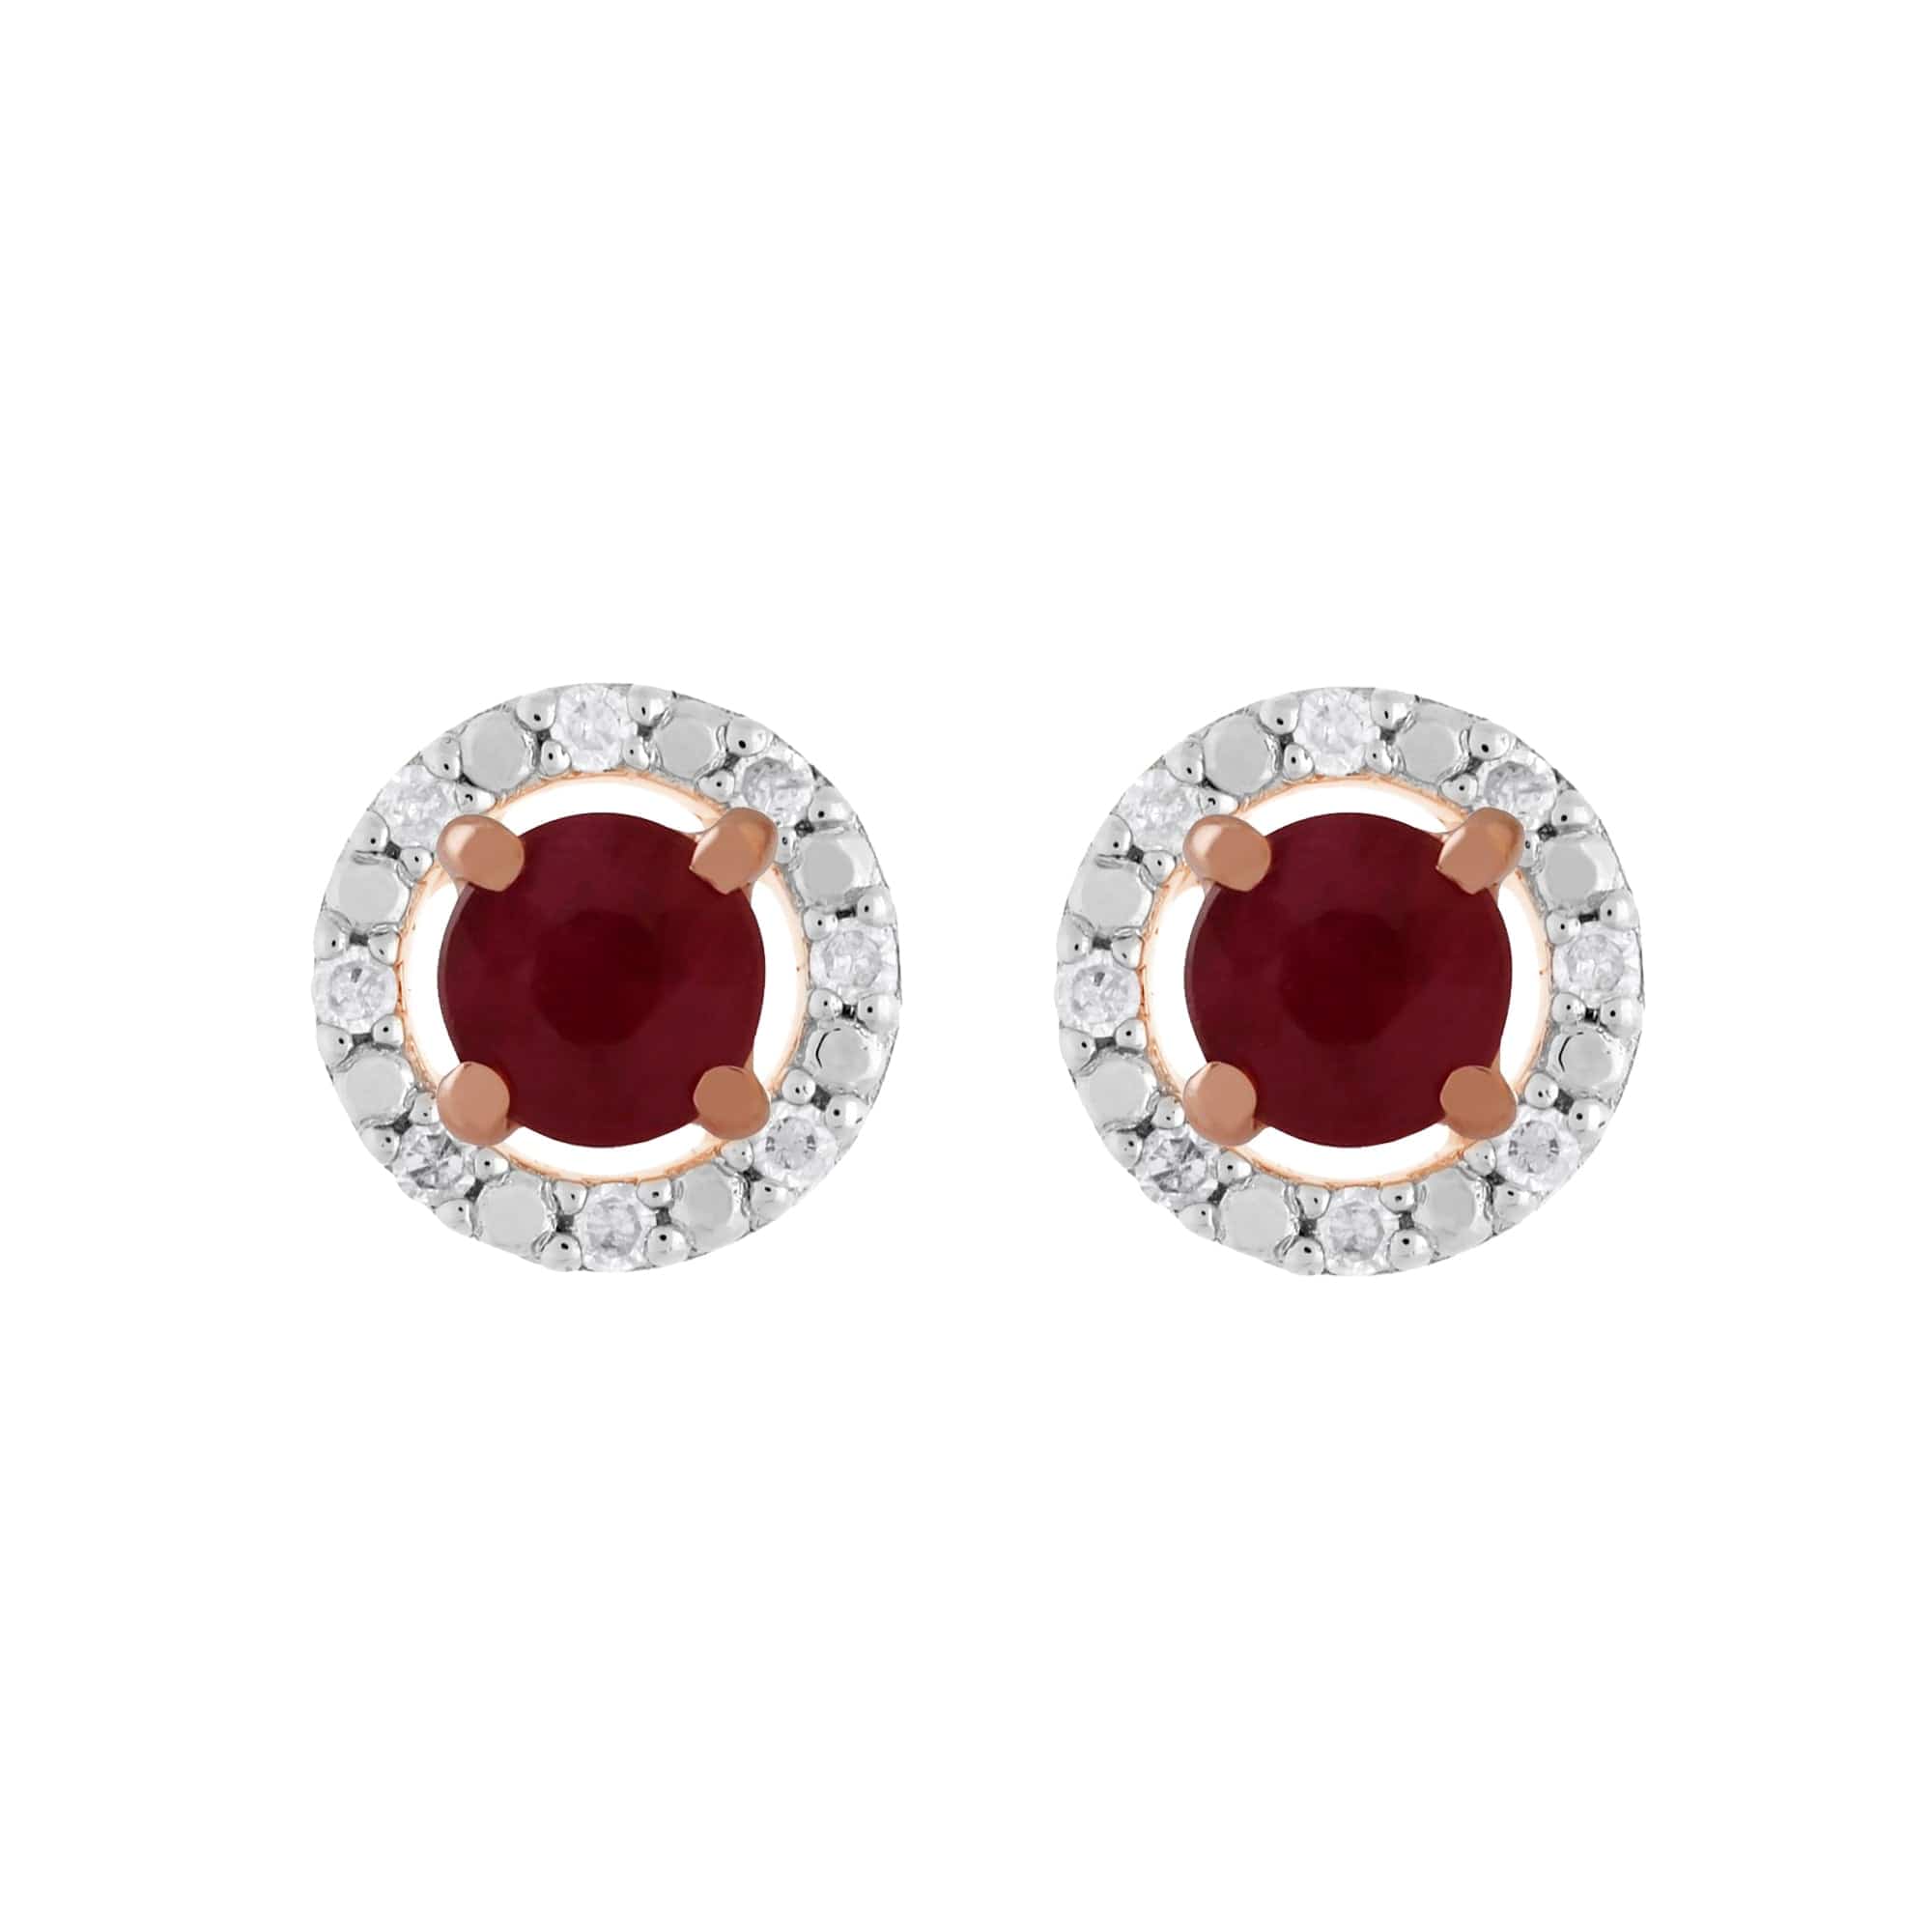 183E4316069-191E0377019 Classic Round Ruby Stud Earrings with Detachable Diamond Round Ear Jacket in 9ct Rose Gold 1